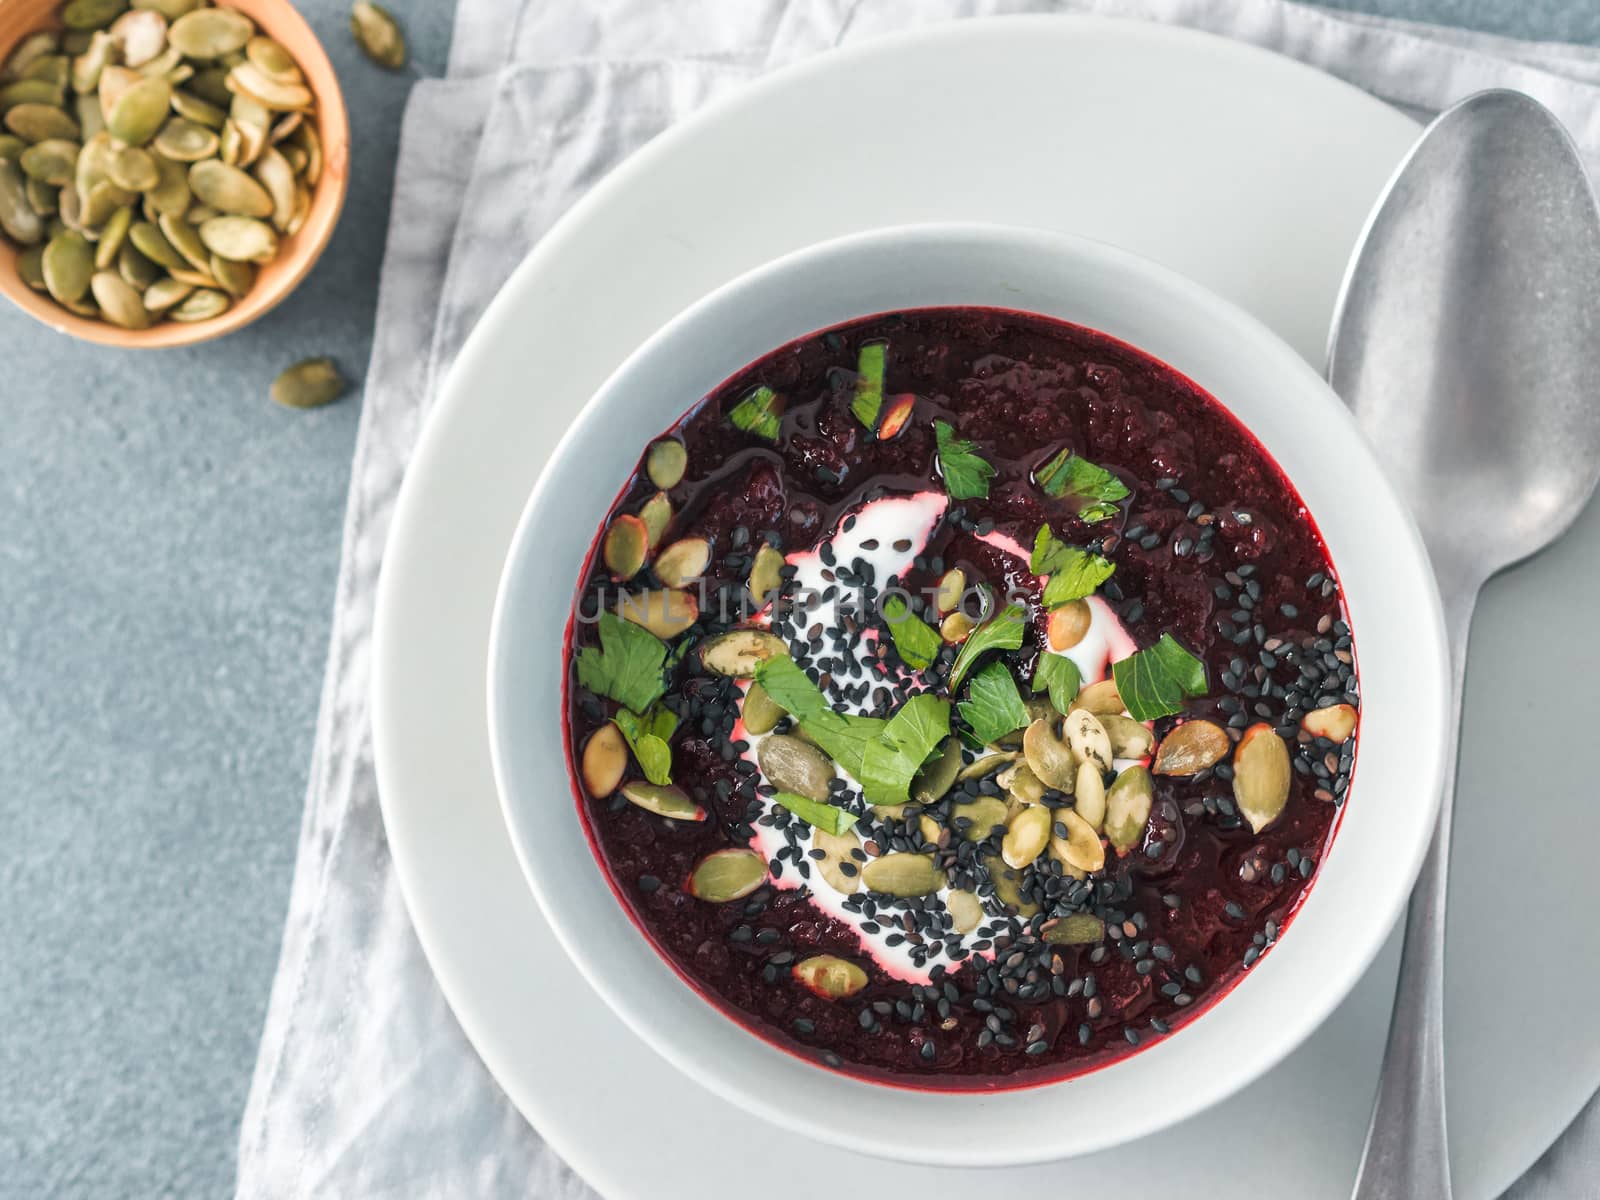 Ideas recipes for healthy soup - Beetroot and ginger soup puree. Clean eating, detox, vegetarian diet concept. Top view of plate with perfect beet soup, dressed pepitas, sesame and parsley. Copy space